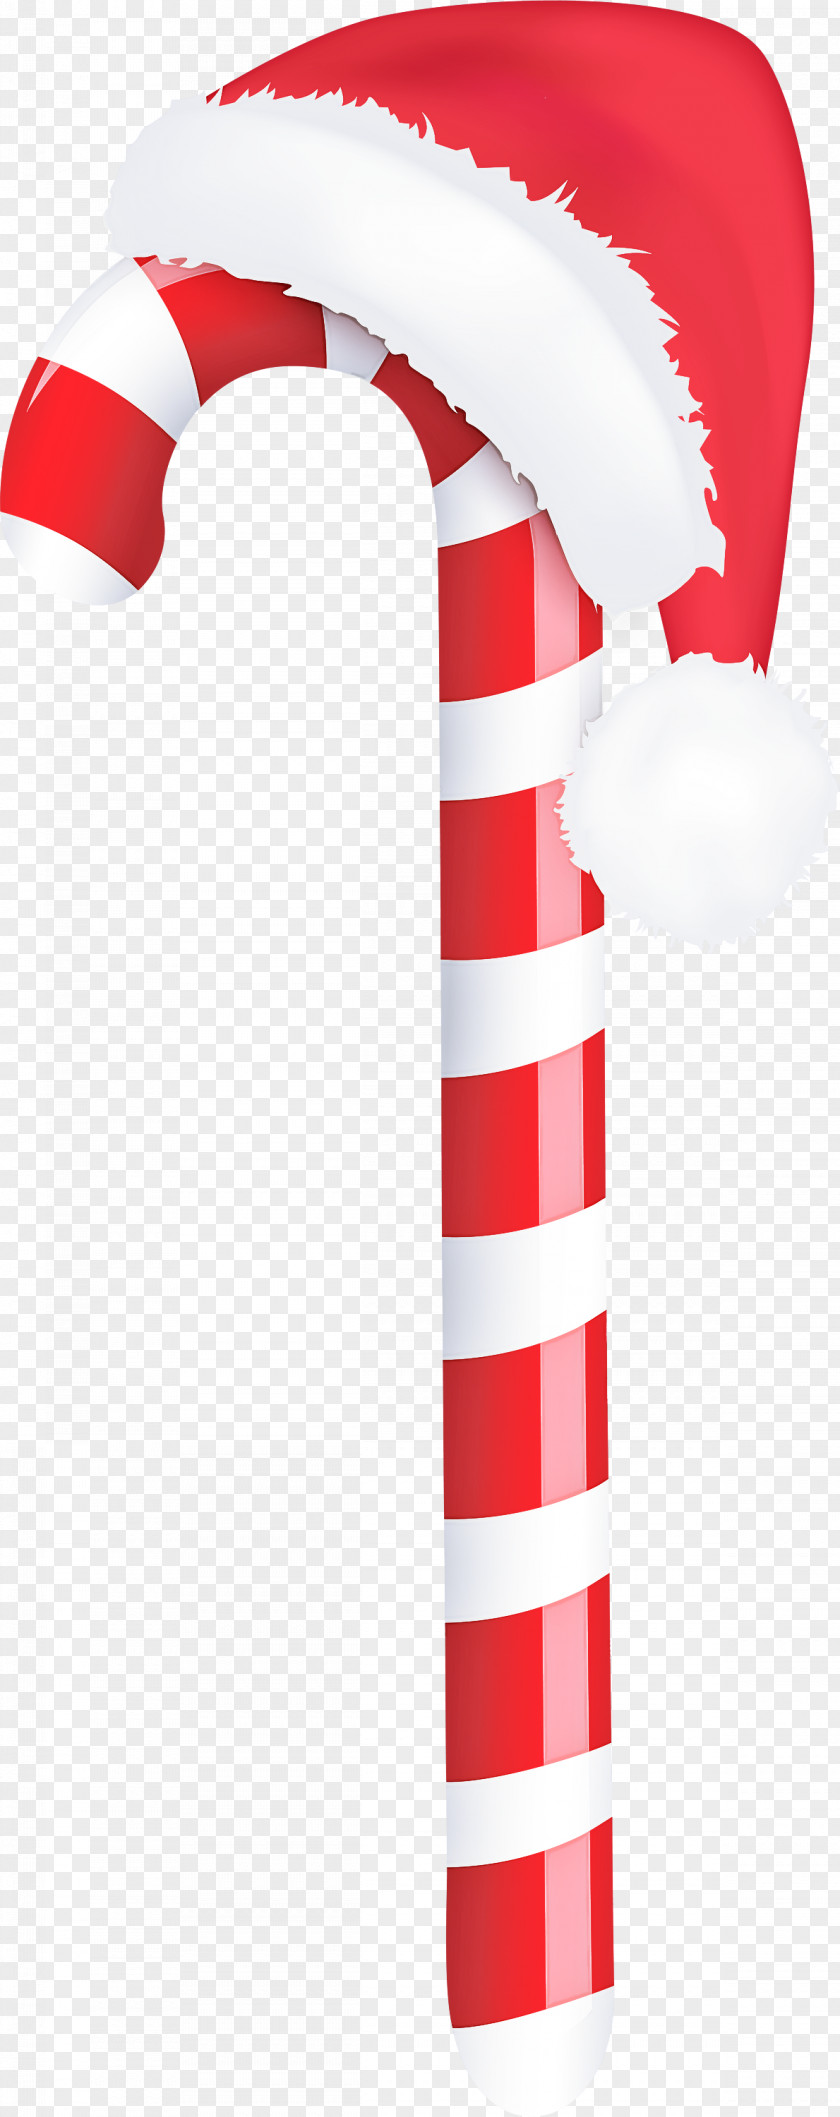 Flag Candy Cane PNG